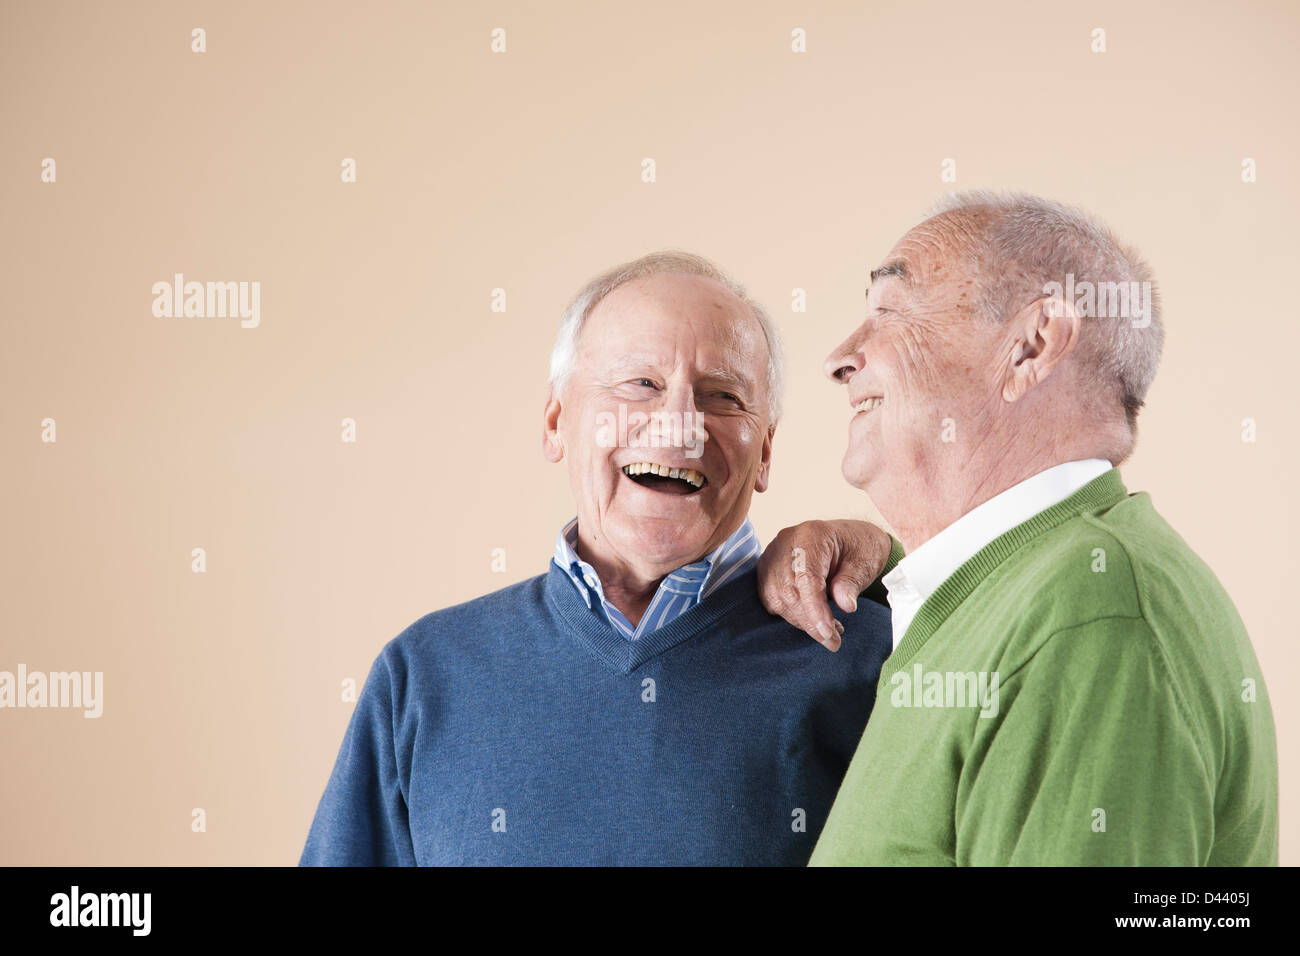 Portrait of Two Senior Men Laughing Together, Studio Shot on Beige Background Stock Photo